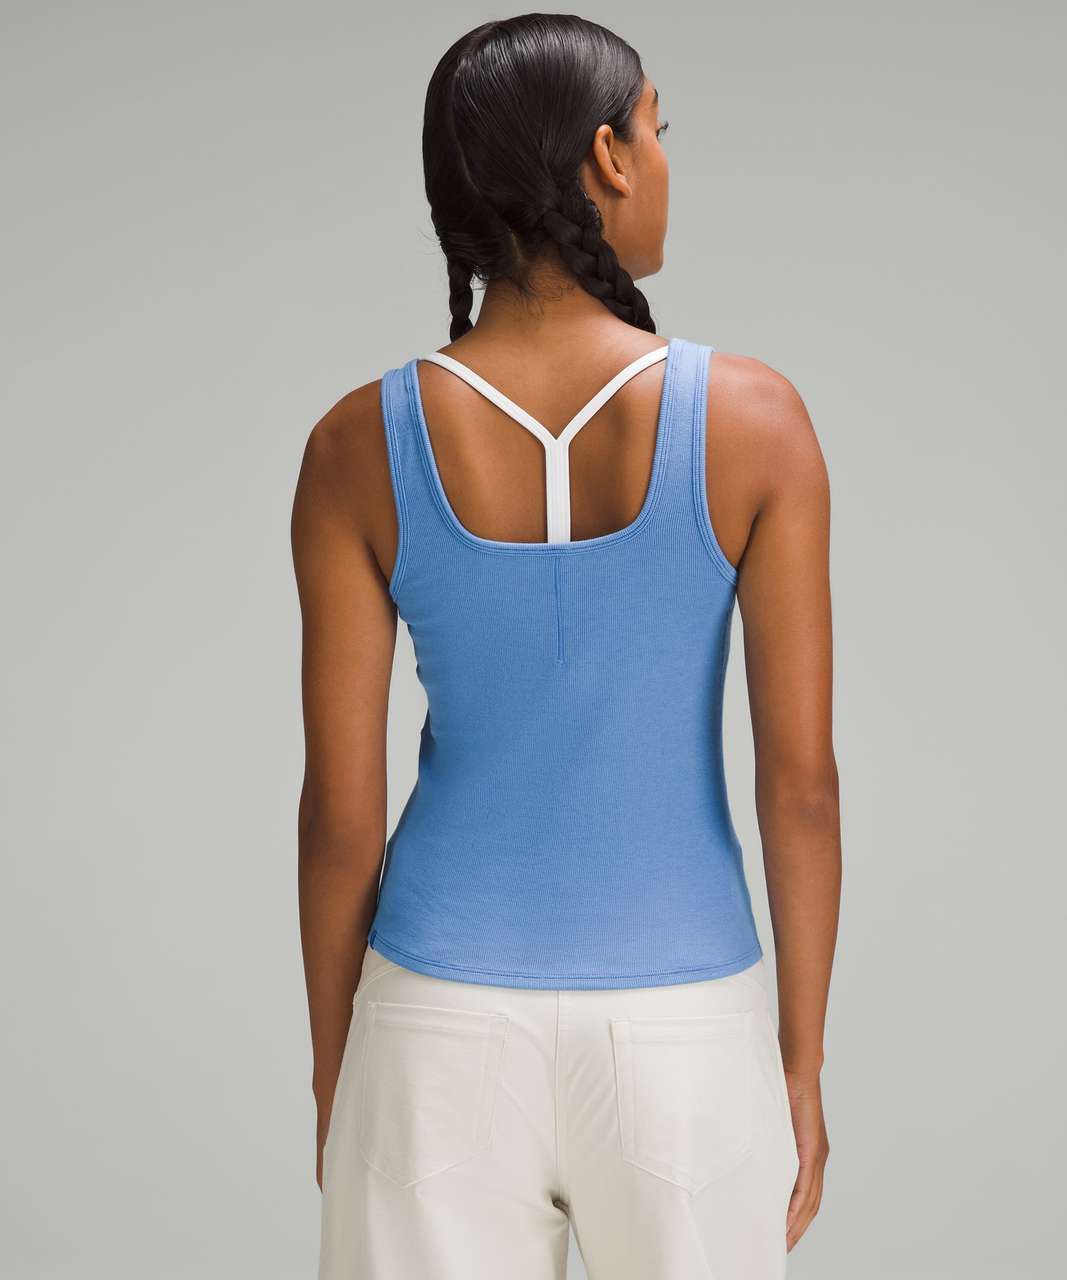 Align High-Neck Tank Top in Blue Nile - just arrived & I think this is my  new favorite tank and colourway! Might remove the padding though 🥲 : r/ lululemon